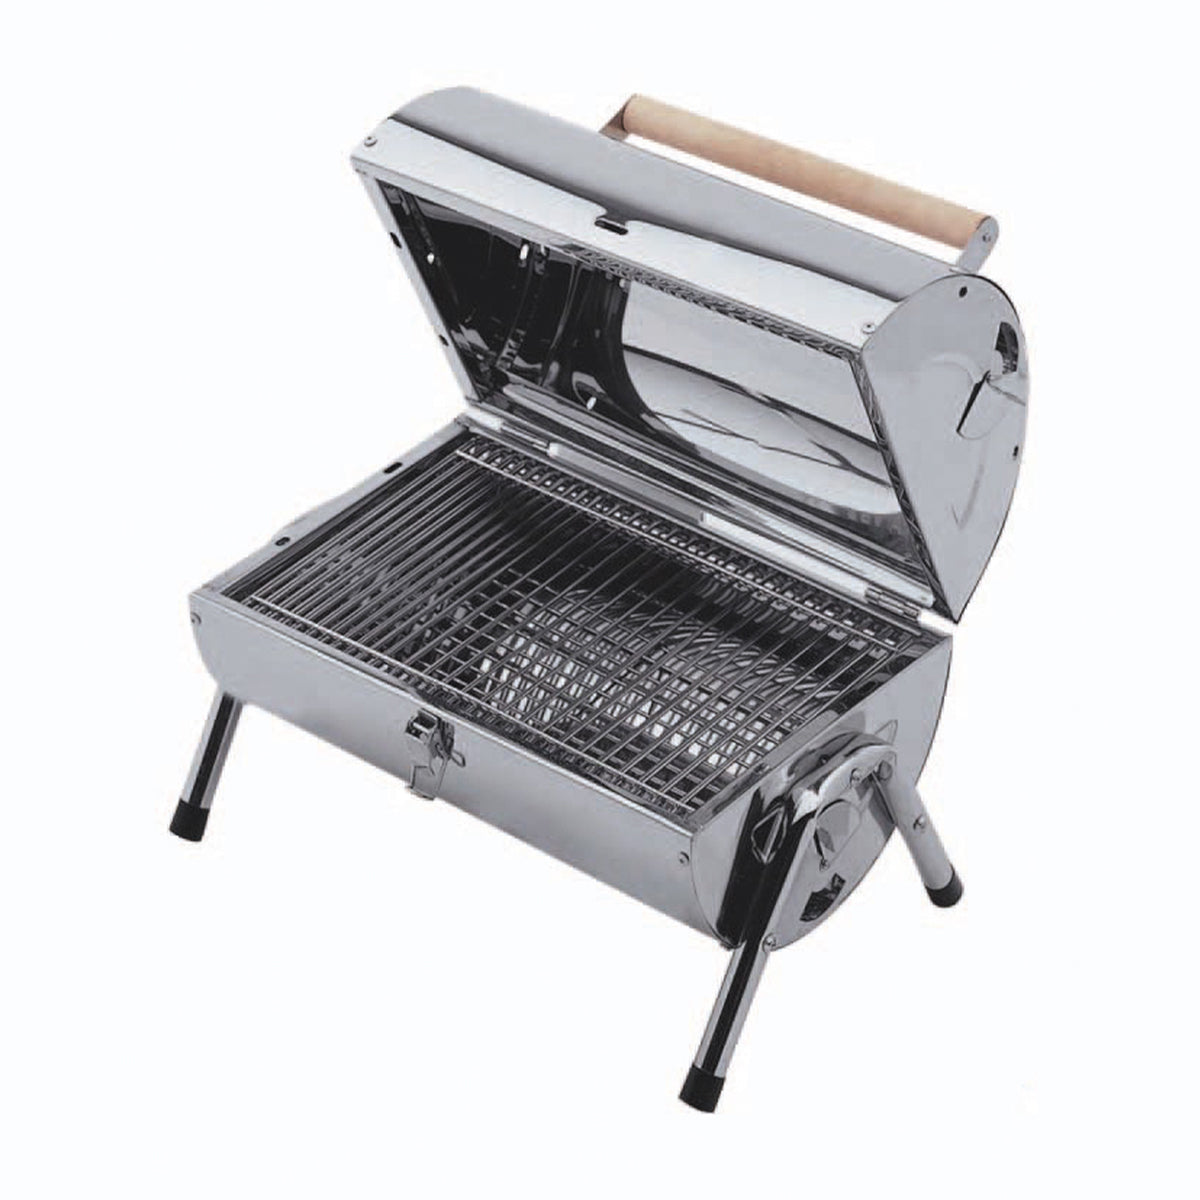 Lifestyle Explorer Portable Charcoal Barbecue